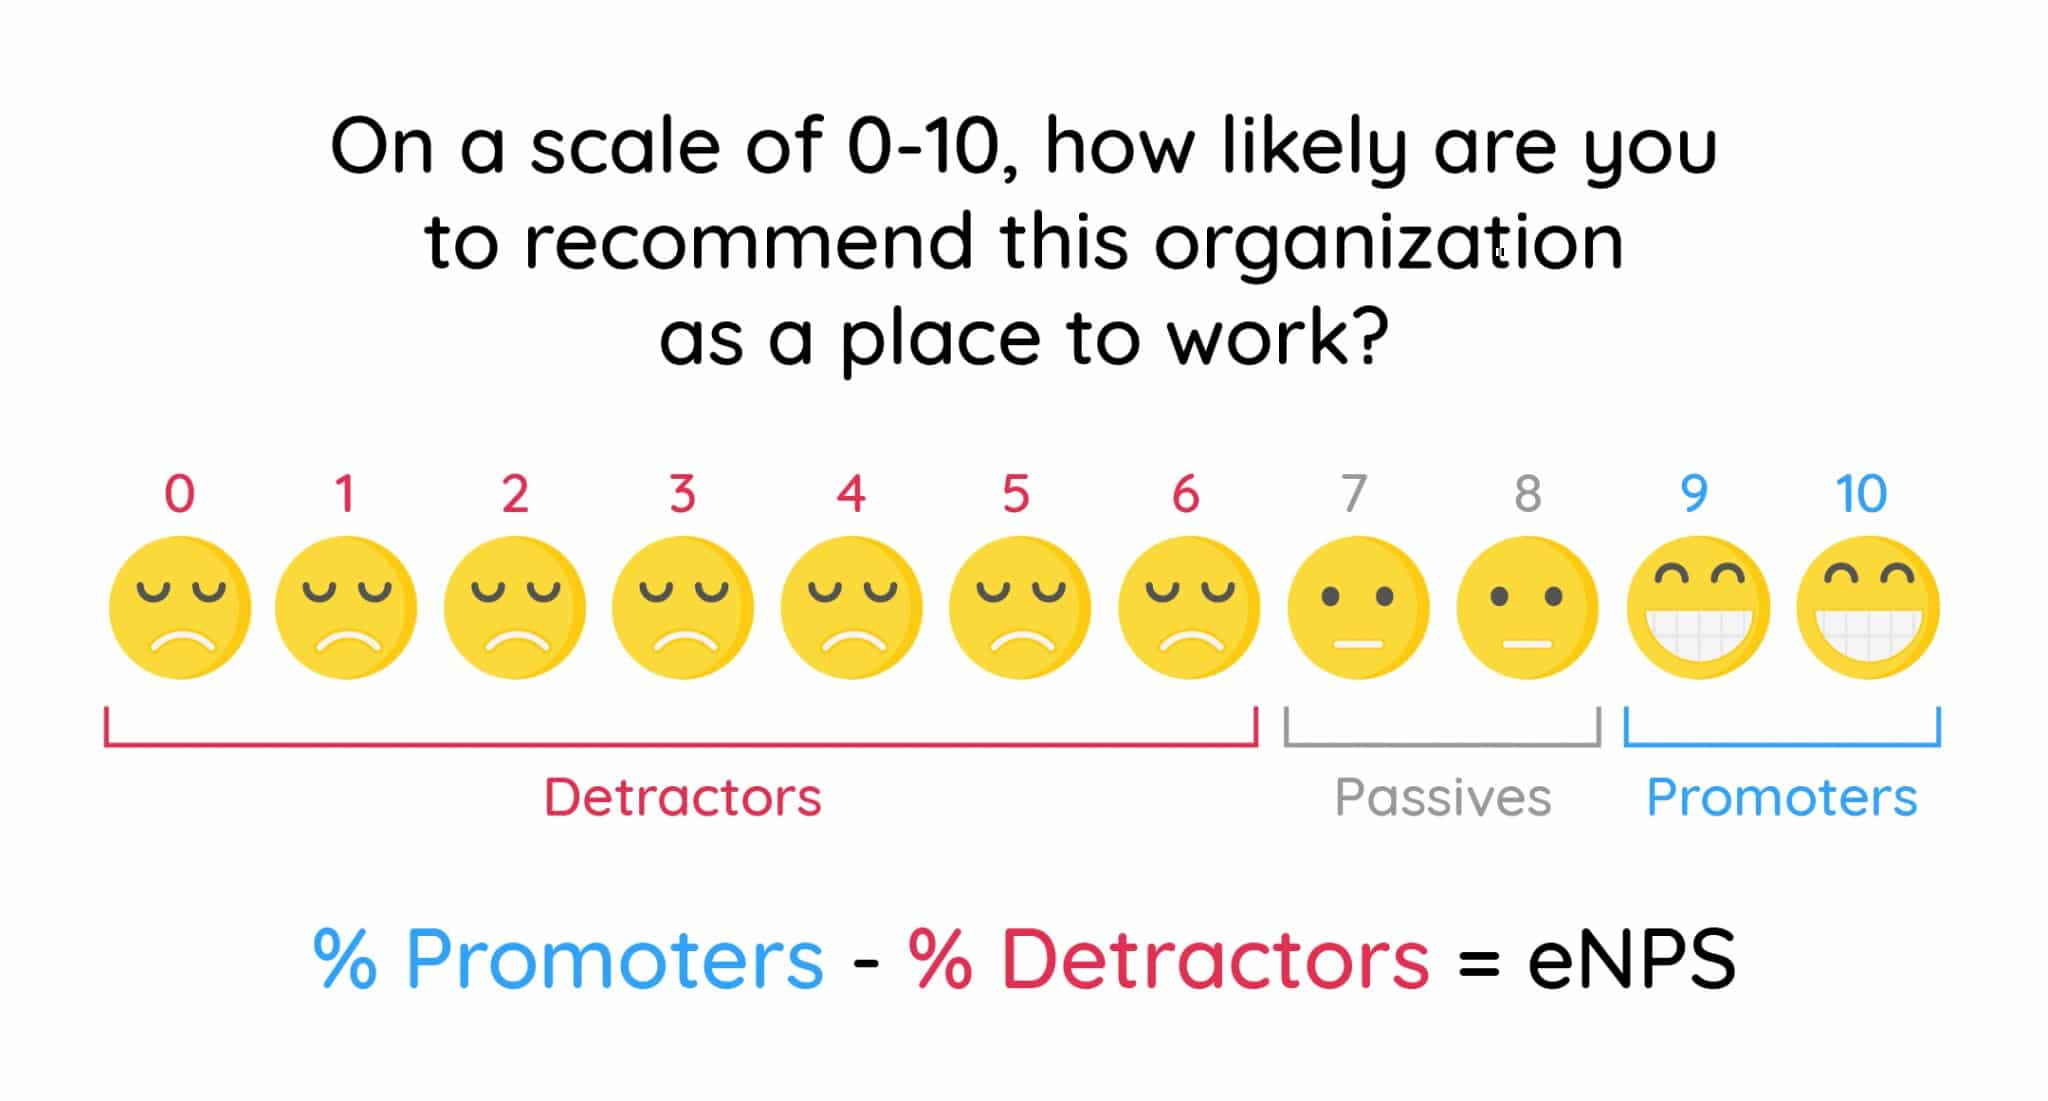 Explanation of eNPS scale, with question "On a scale of 0-10, how likely are you to recommend this organization as a place to work?" and emoji faces representing satisfaction from 0 to 10. Employees answering 0-6 are detractors, while 9-10 are promoters. % Promoters - % Detractors = eNPS